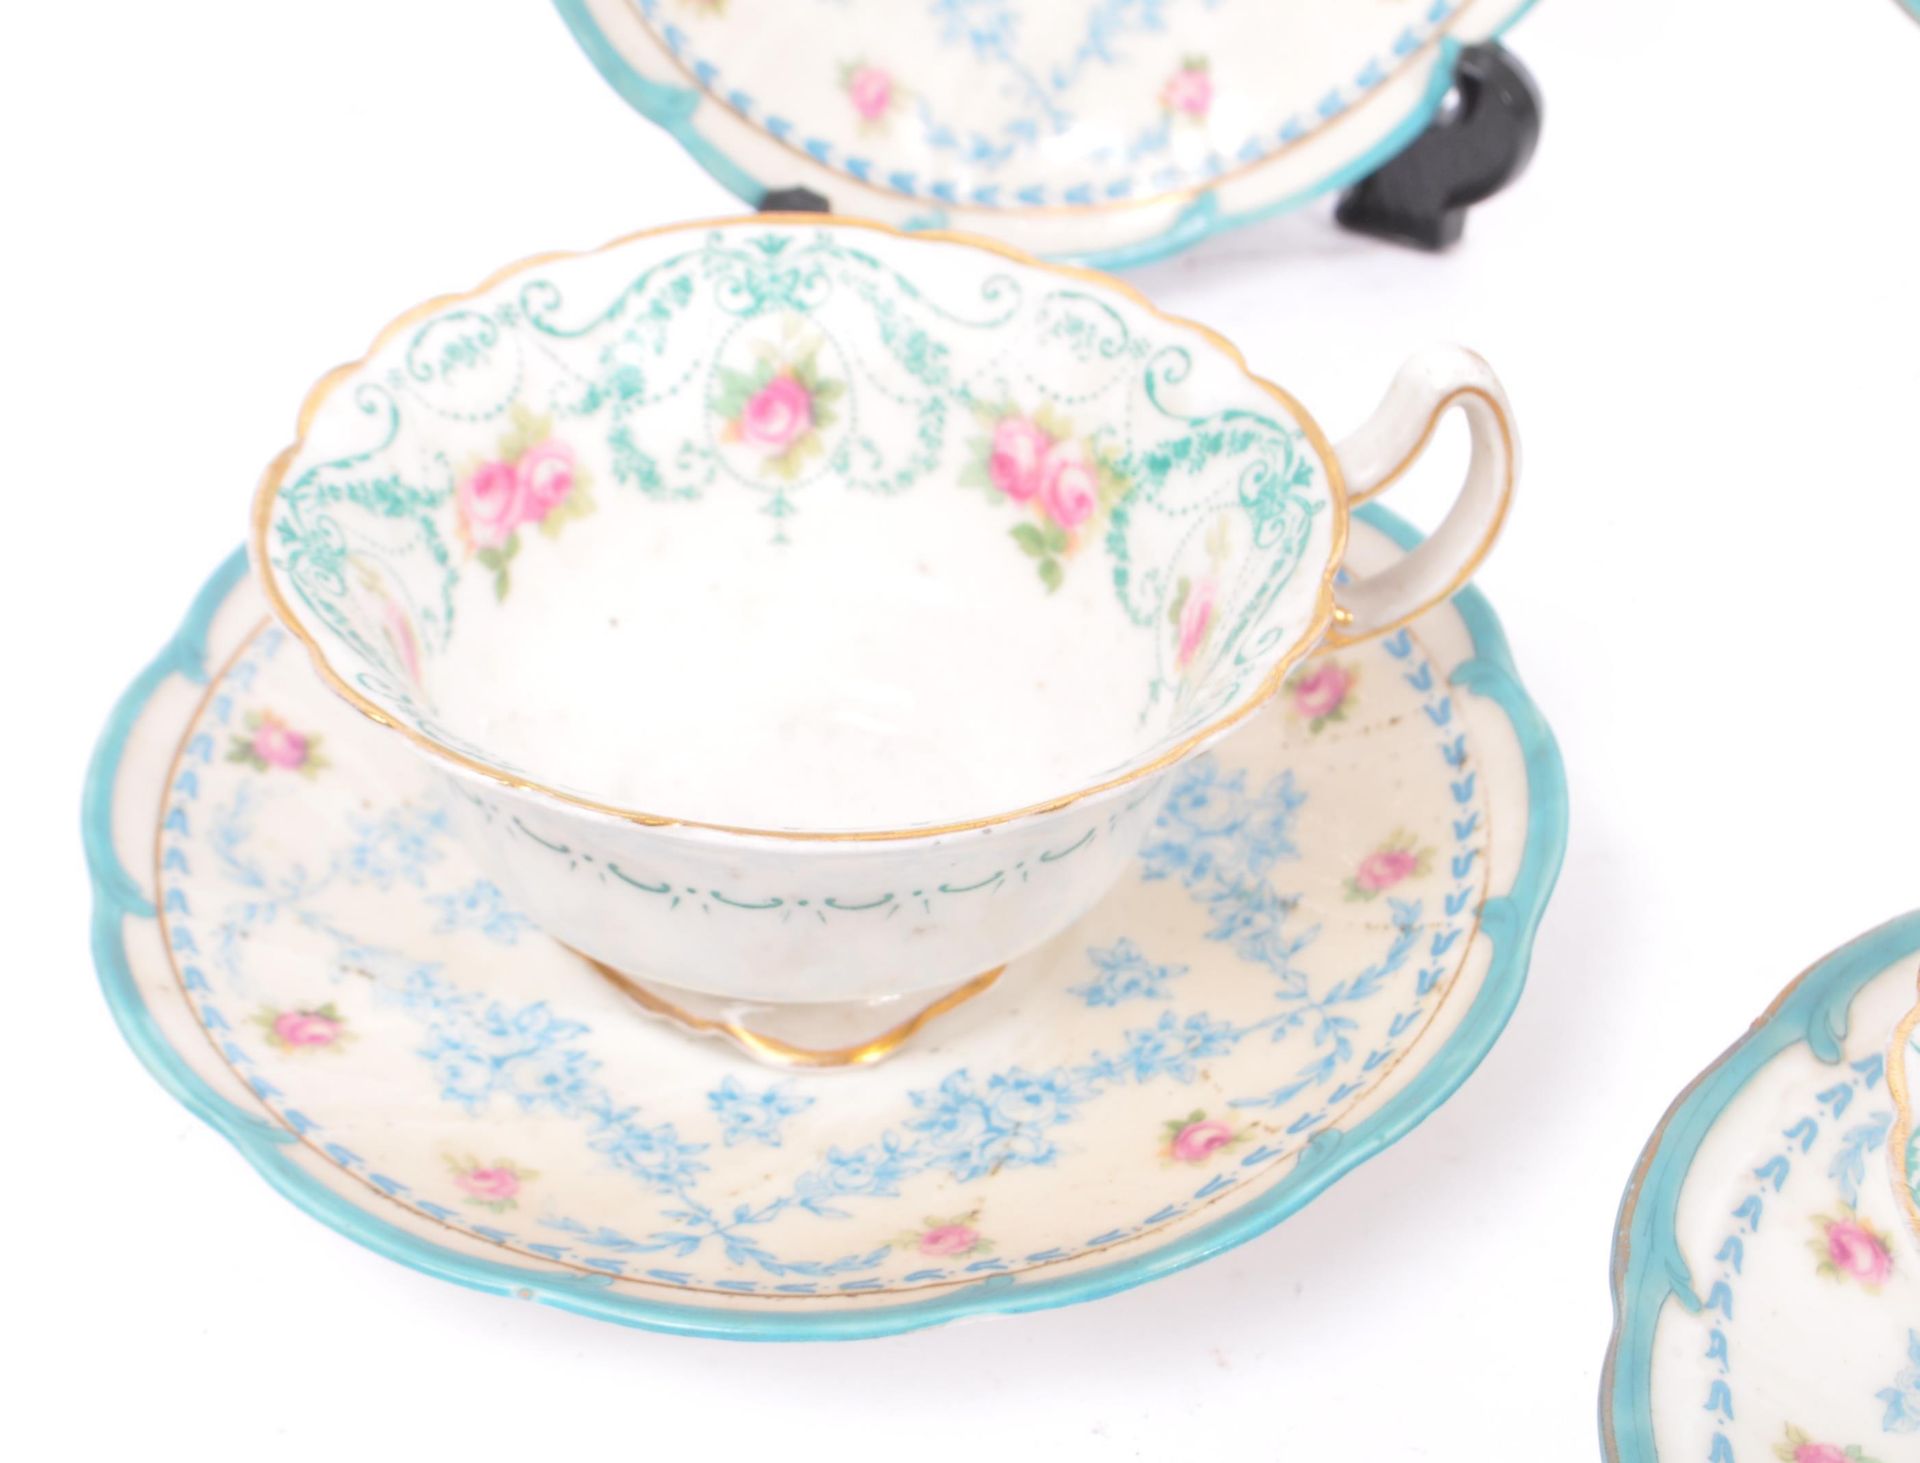 THREE EARLY 20TH CENTURY ROYAL DOULTON TEACUP & SAUCER - Image 3 of 5